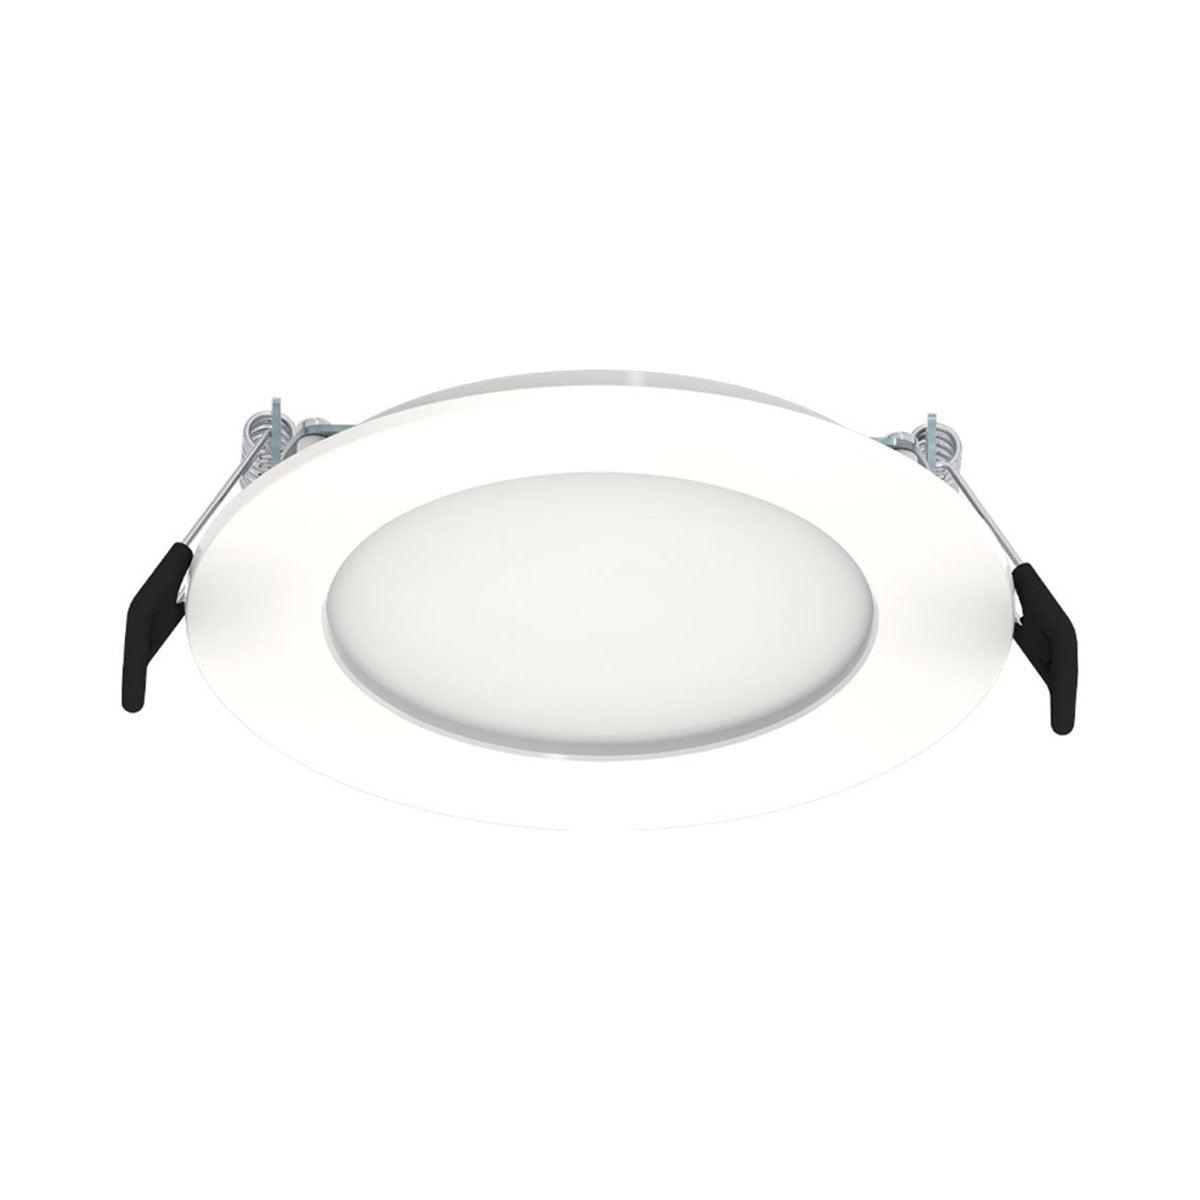 6 In. Edge-Lit Wafer Canless LED Recessed Light, 13 Watt, 1100 Lumens, Selectable CCT, 2700K to 5000K, Smooth Trim